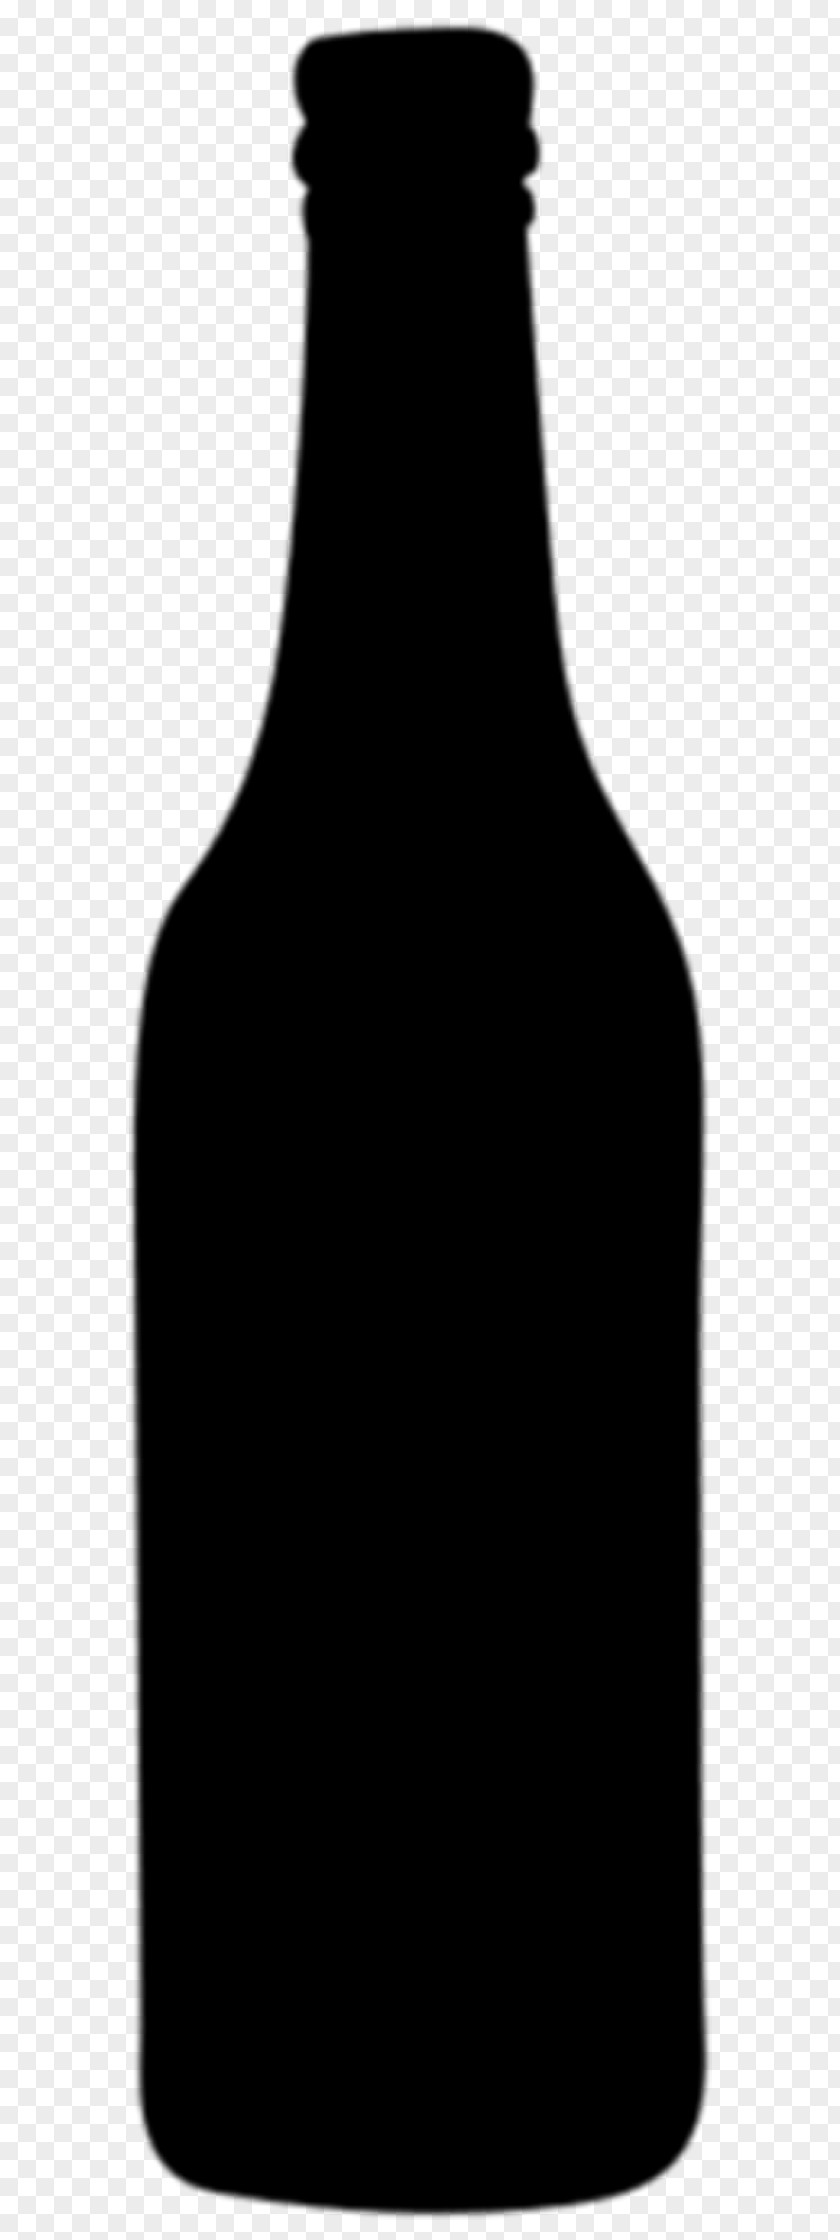 Beer Bottle S.A. Damm Glass Wine PNG